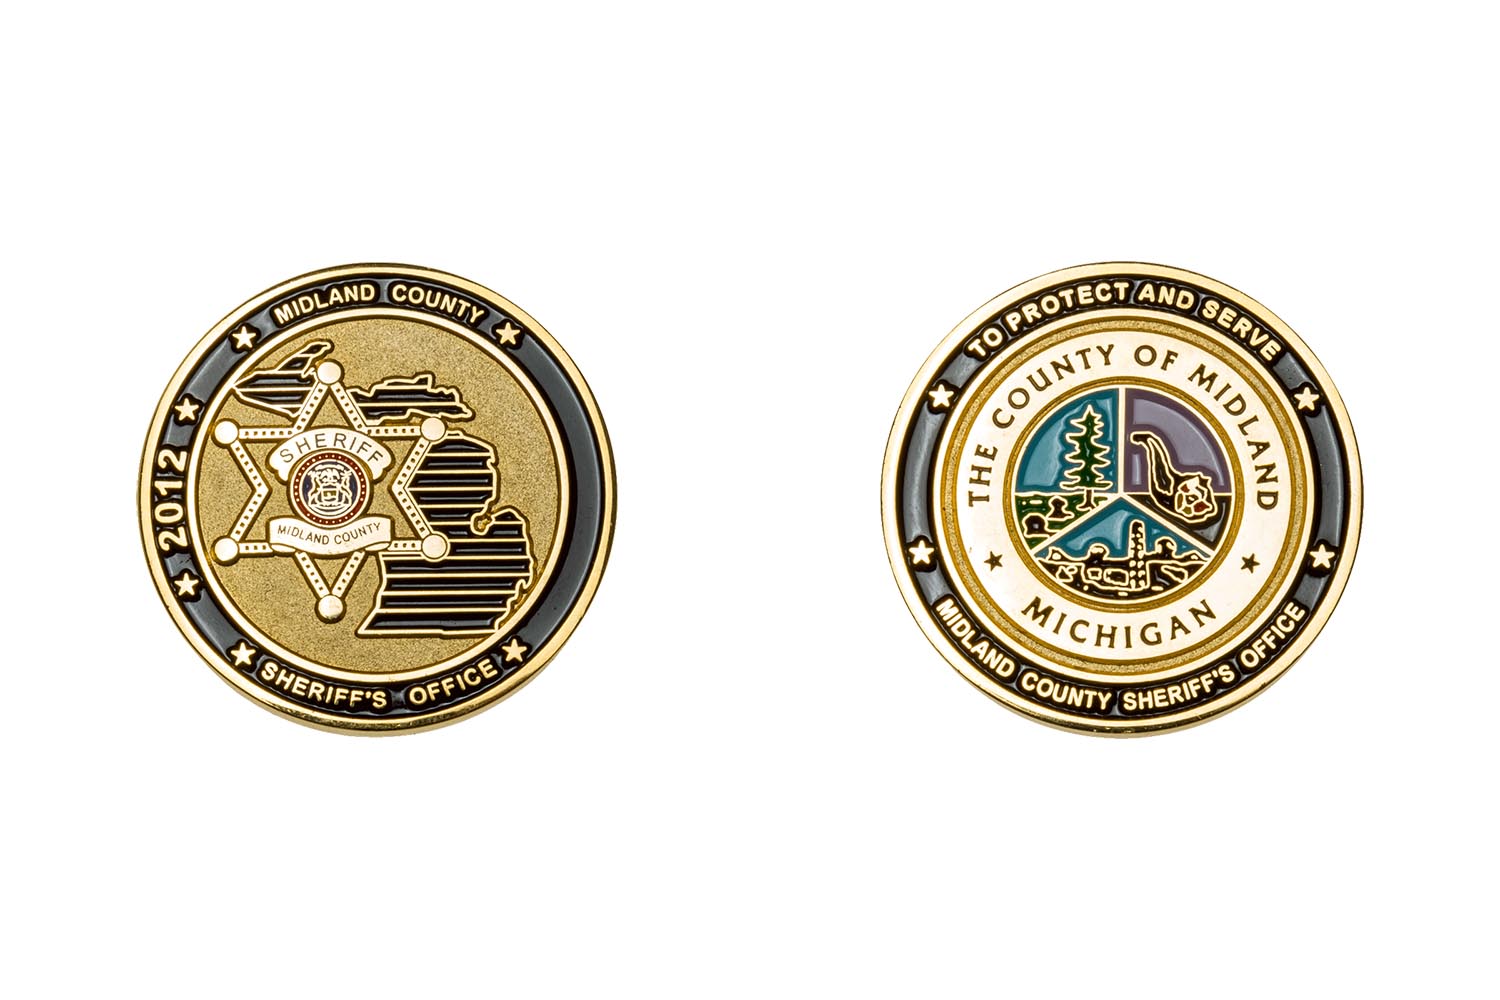 Metal sheriff's coins